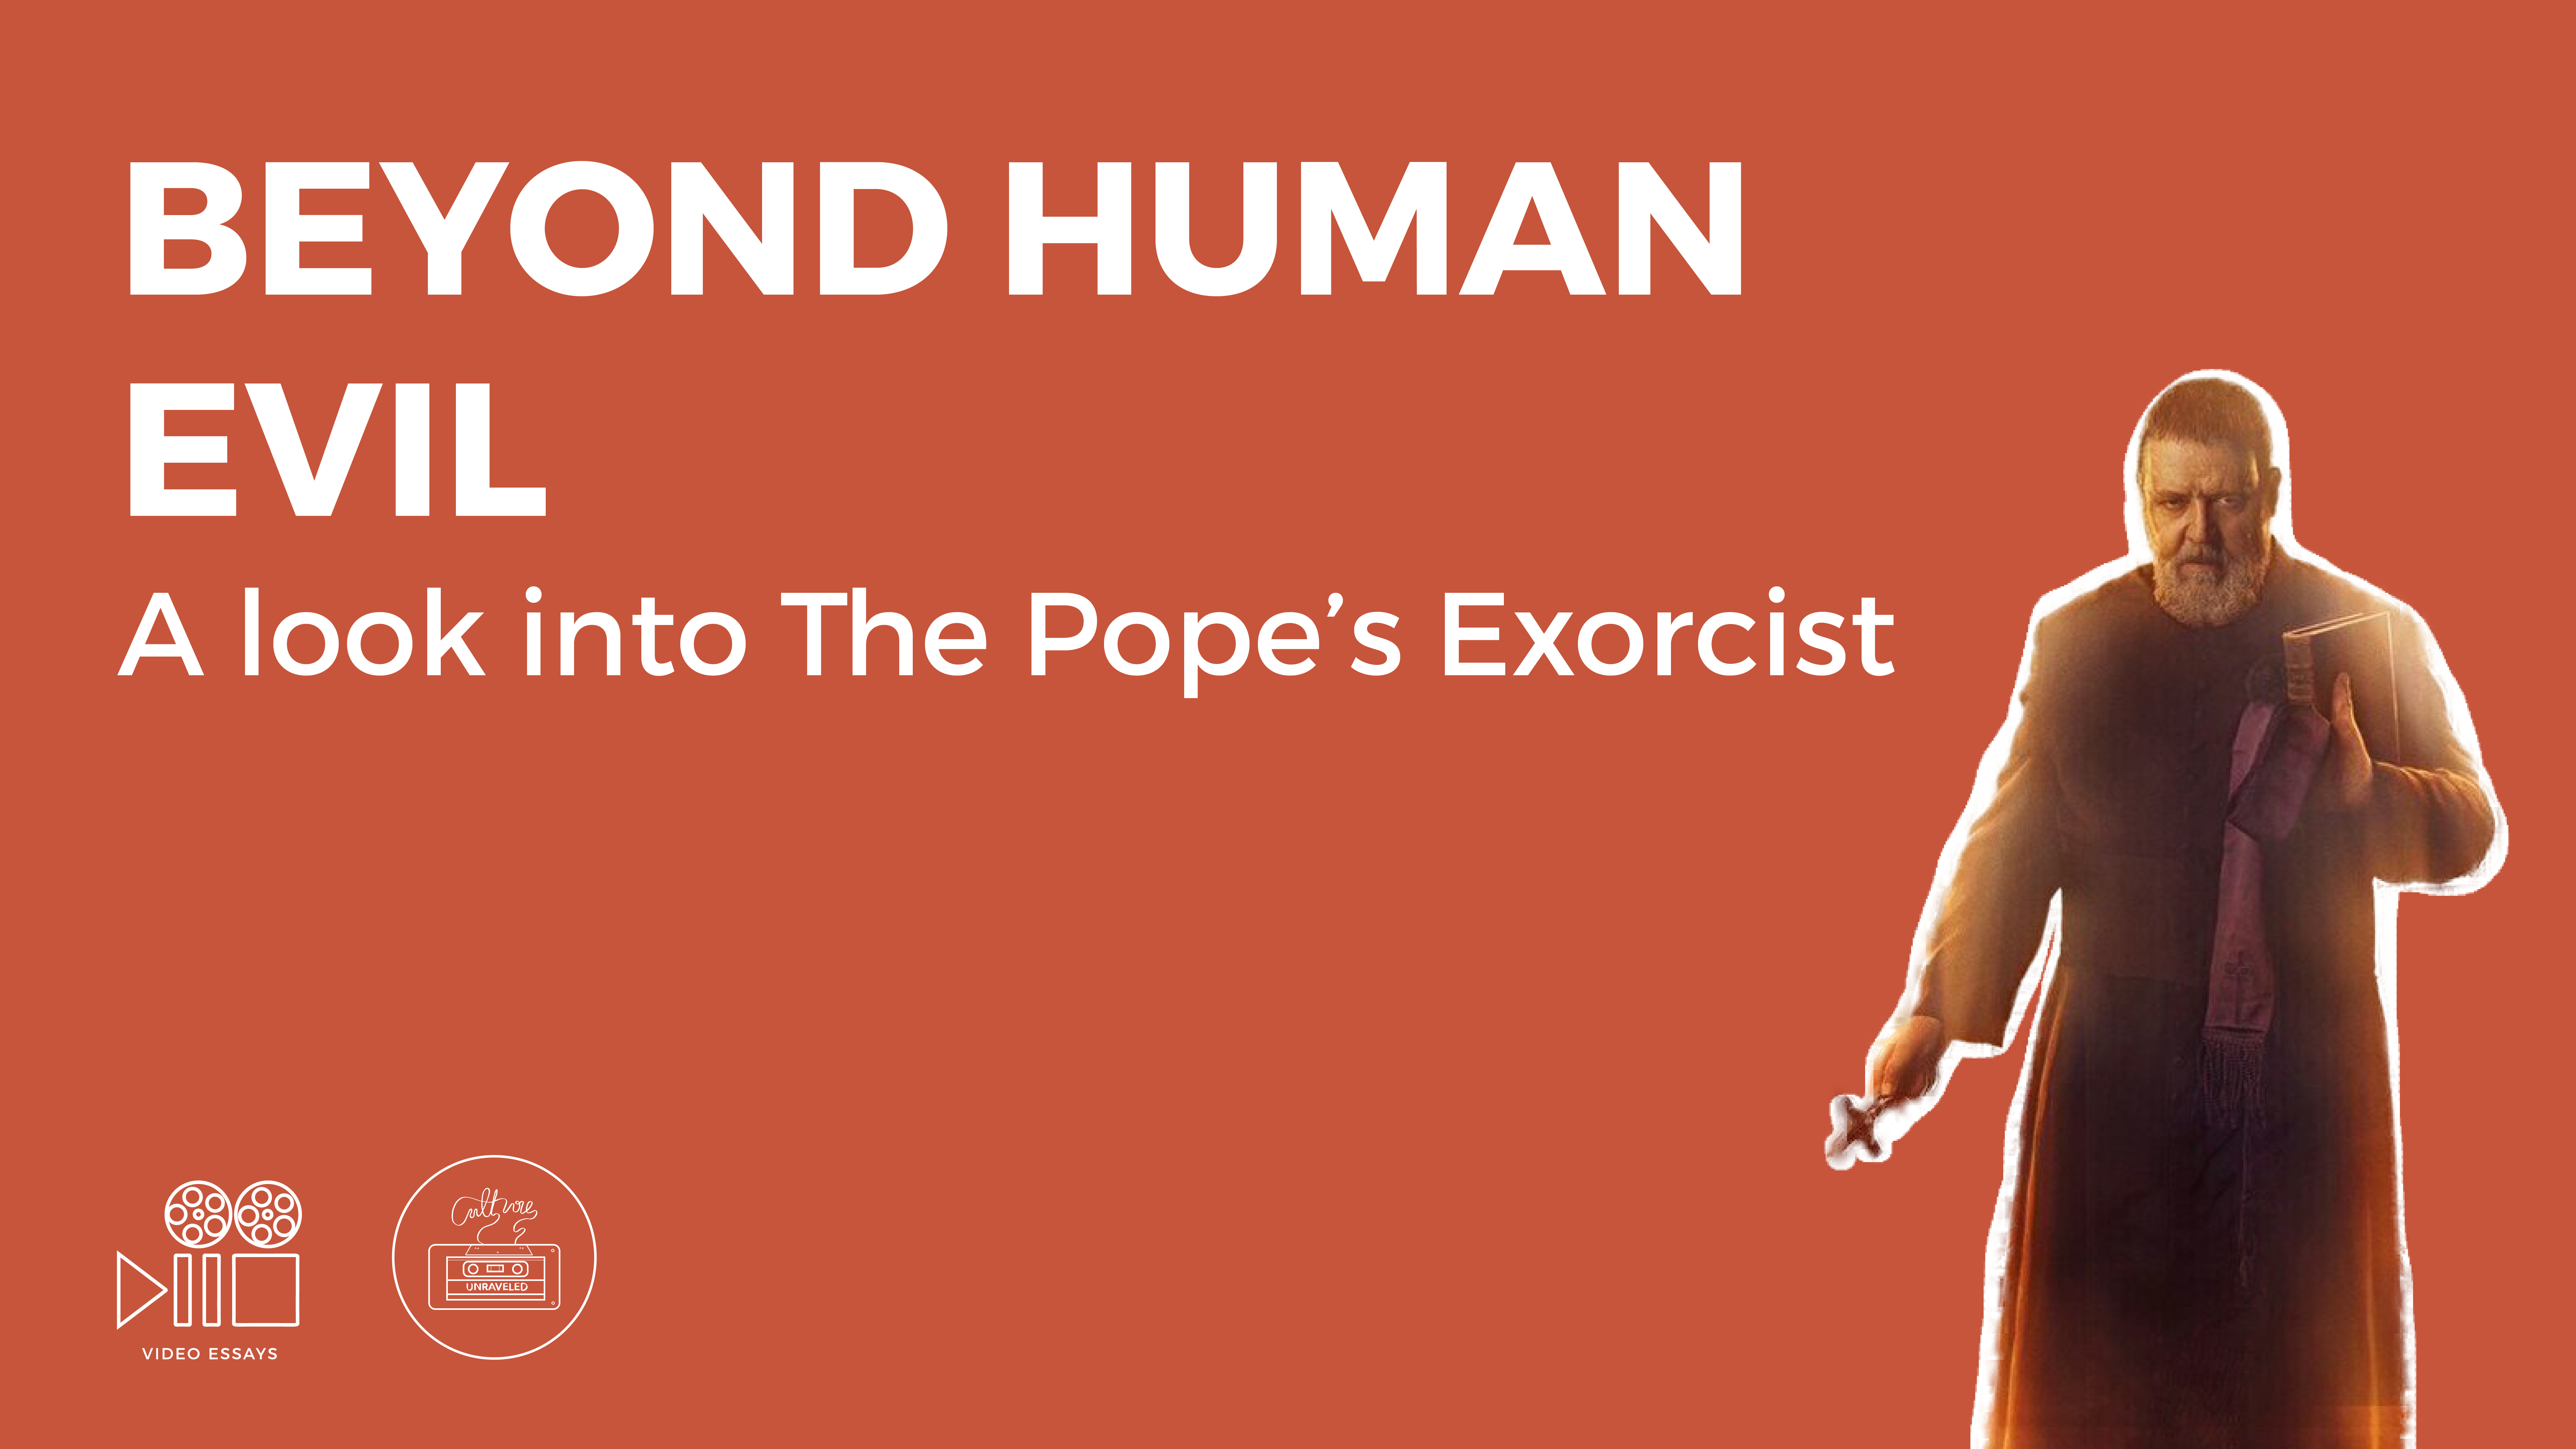 Beyond Human Evil. A Look into The Pope’s Exorcist